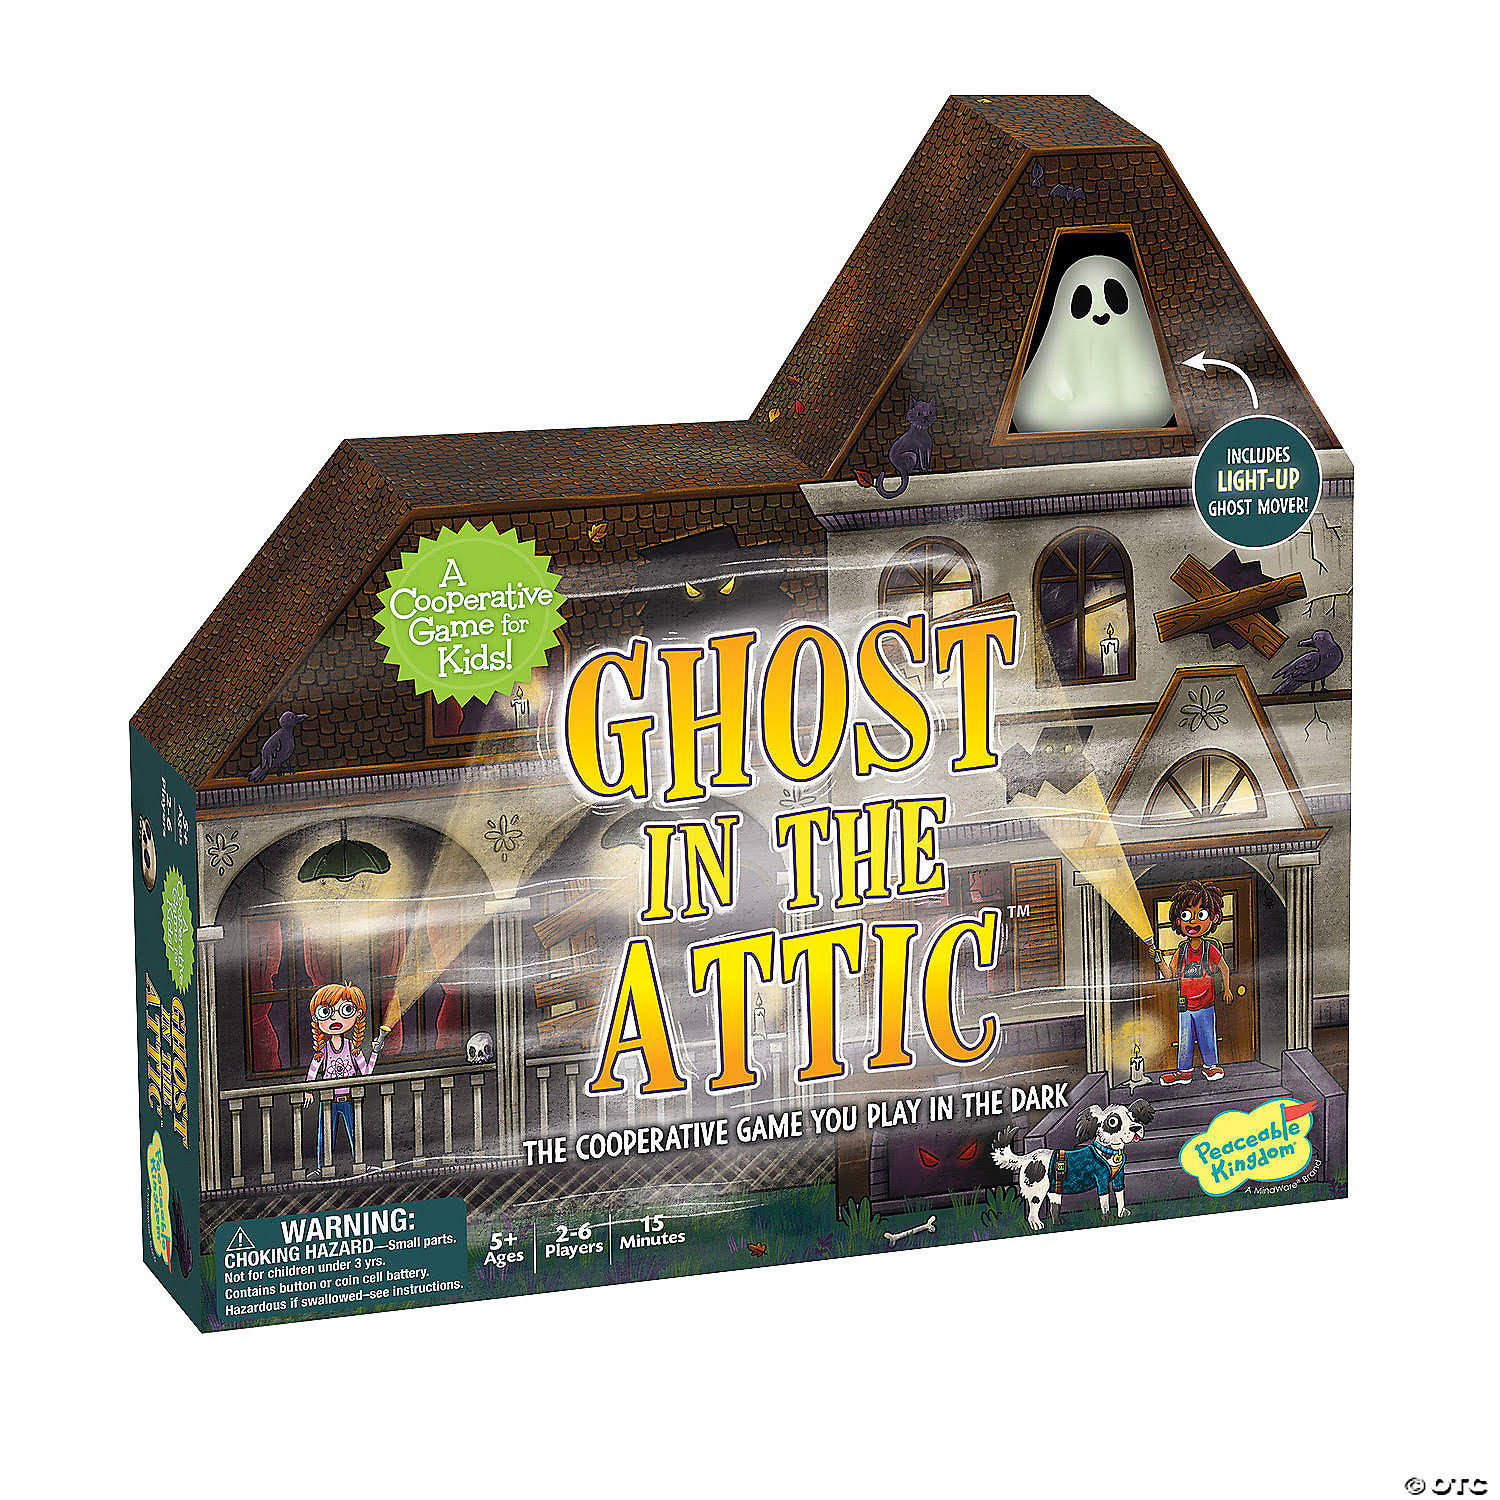 Peaceable Kingdom Ghost in The Attic - Cooperative Board Game For Family Game Night – Unique Glow-in-the-Dark Board Game - Great For Kids Ages 5 & Up